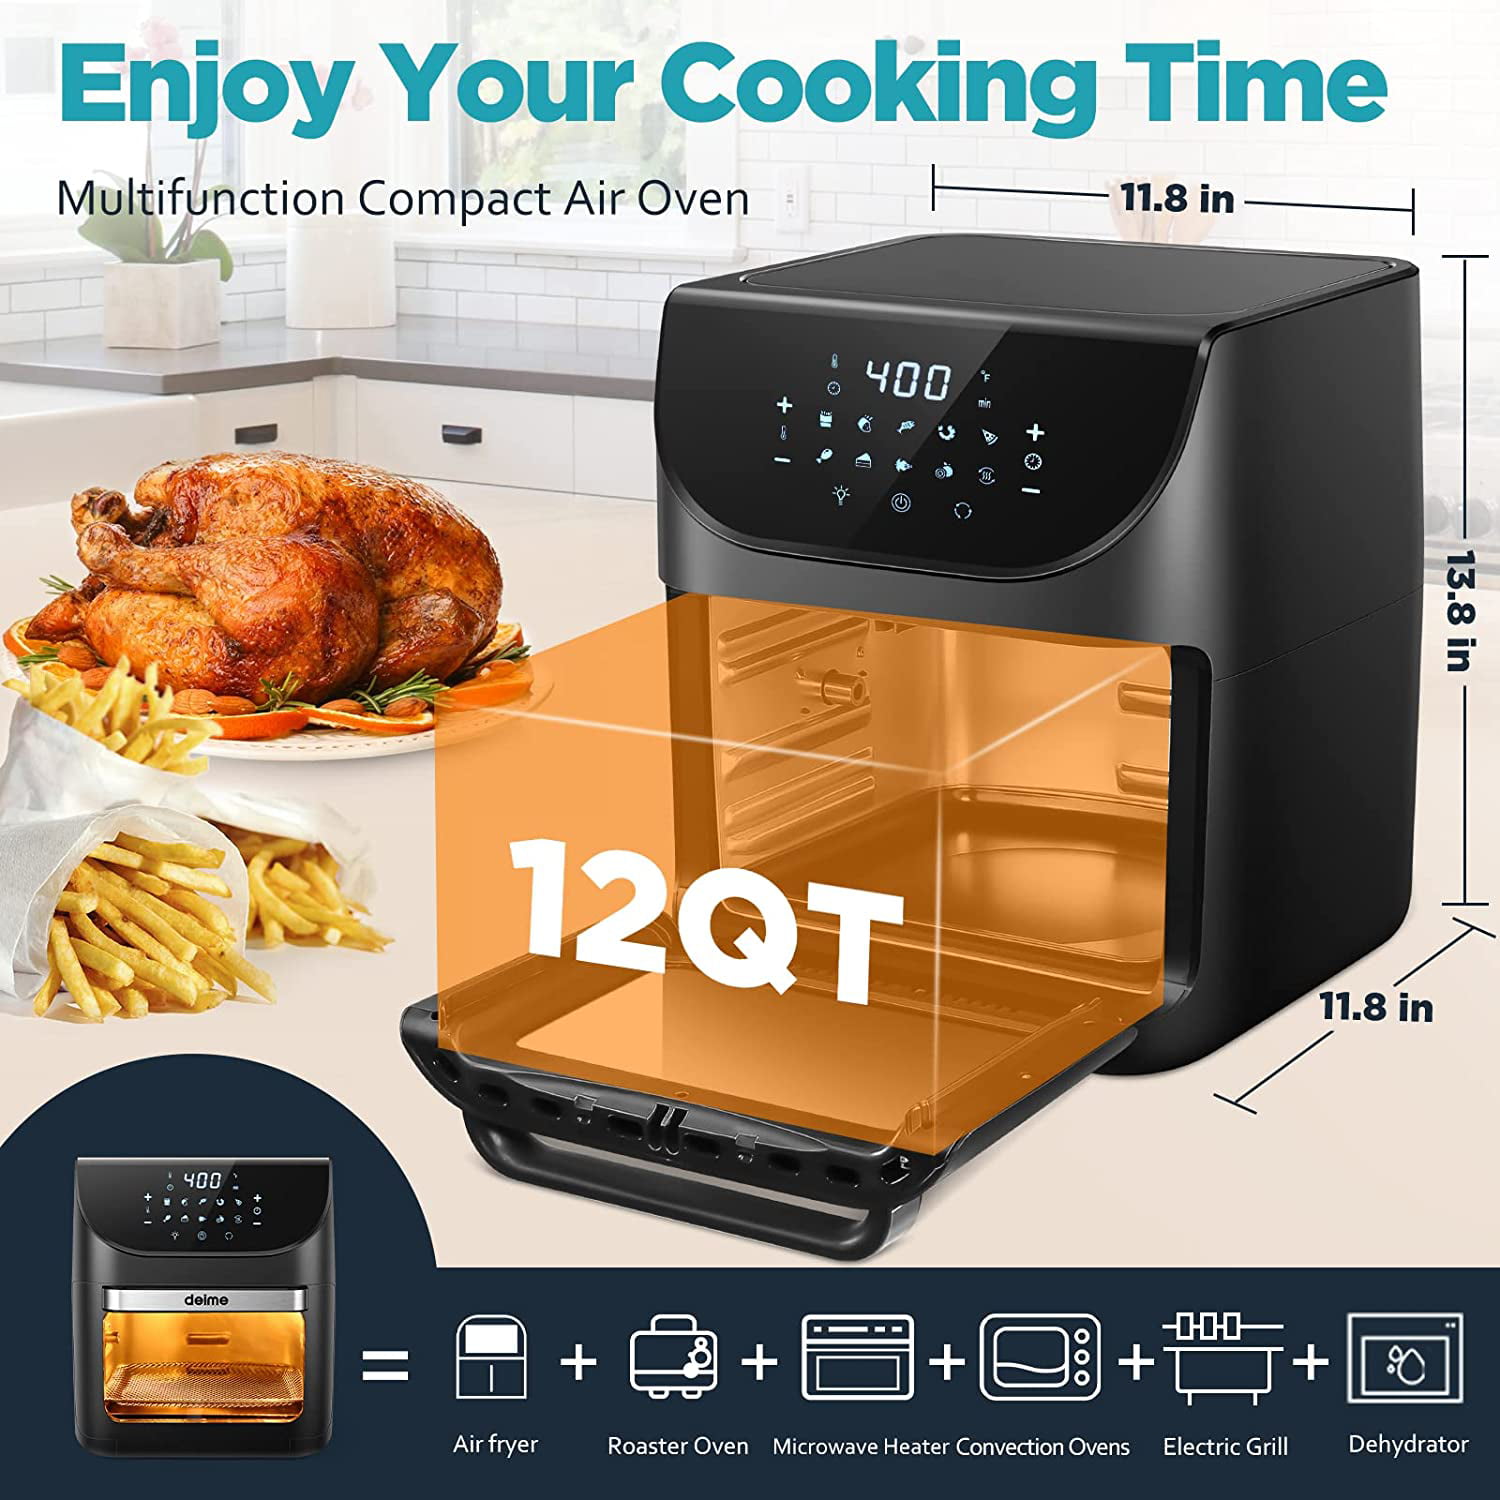  Caynel 12.7 Quart Digital Air Fryer with Rotisserie,  Dehydrator, Convection Oven, 8 Presets to Air Fry, Roast, Dehydrate, Bake &  More, Glass Viewing Window, Large Capacity, 1700W : Home & Kitchen